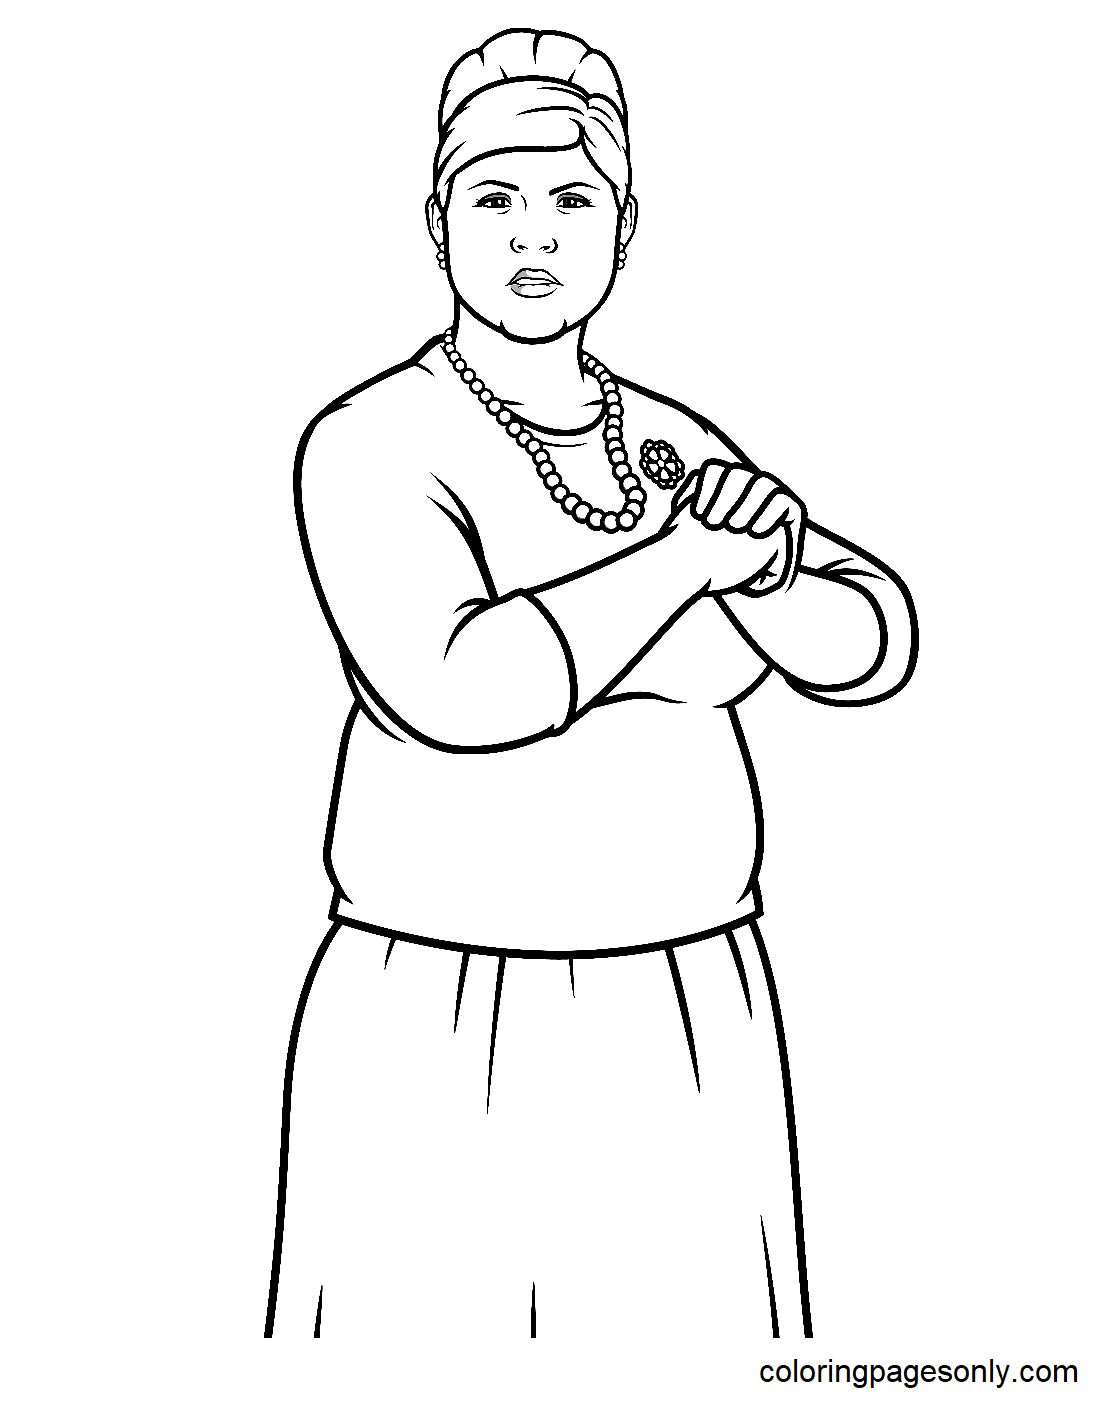 Pam Poovey Coloring Page